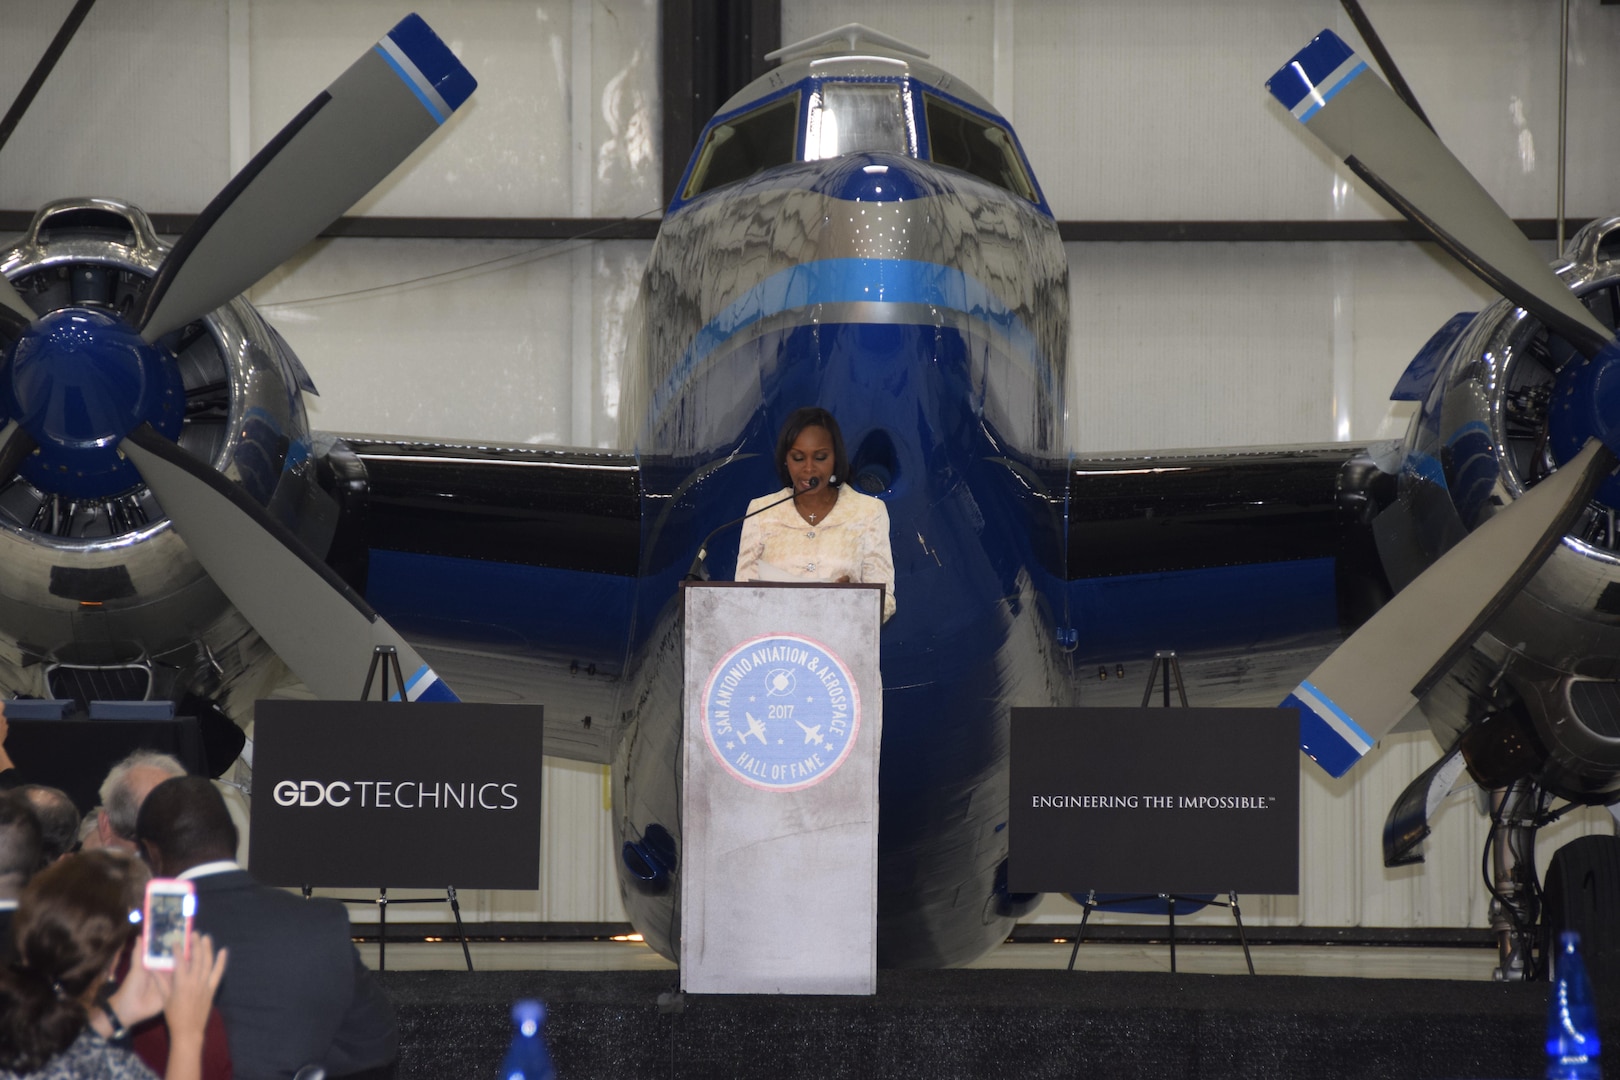 San Antonio Mayor Ivy Taylor speaks at the San Antonio Aviation and Aerospace Hall of Fame awards dinner, March 30, 2017 at the GDC Technics Hanger, Port San Antonio, (formerly Kelly Air Force Base), Texas.
(U.S. Air Force photo by Minnie Jones)
